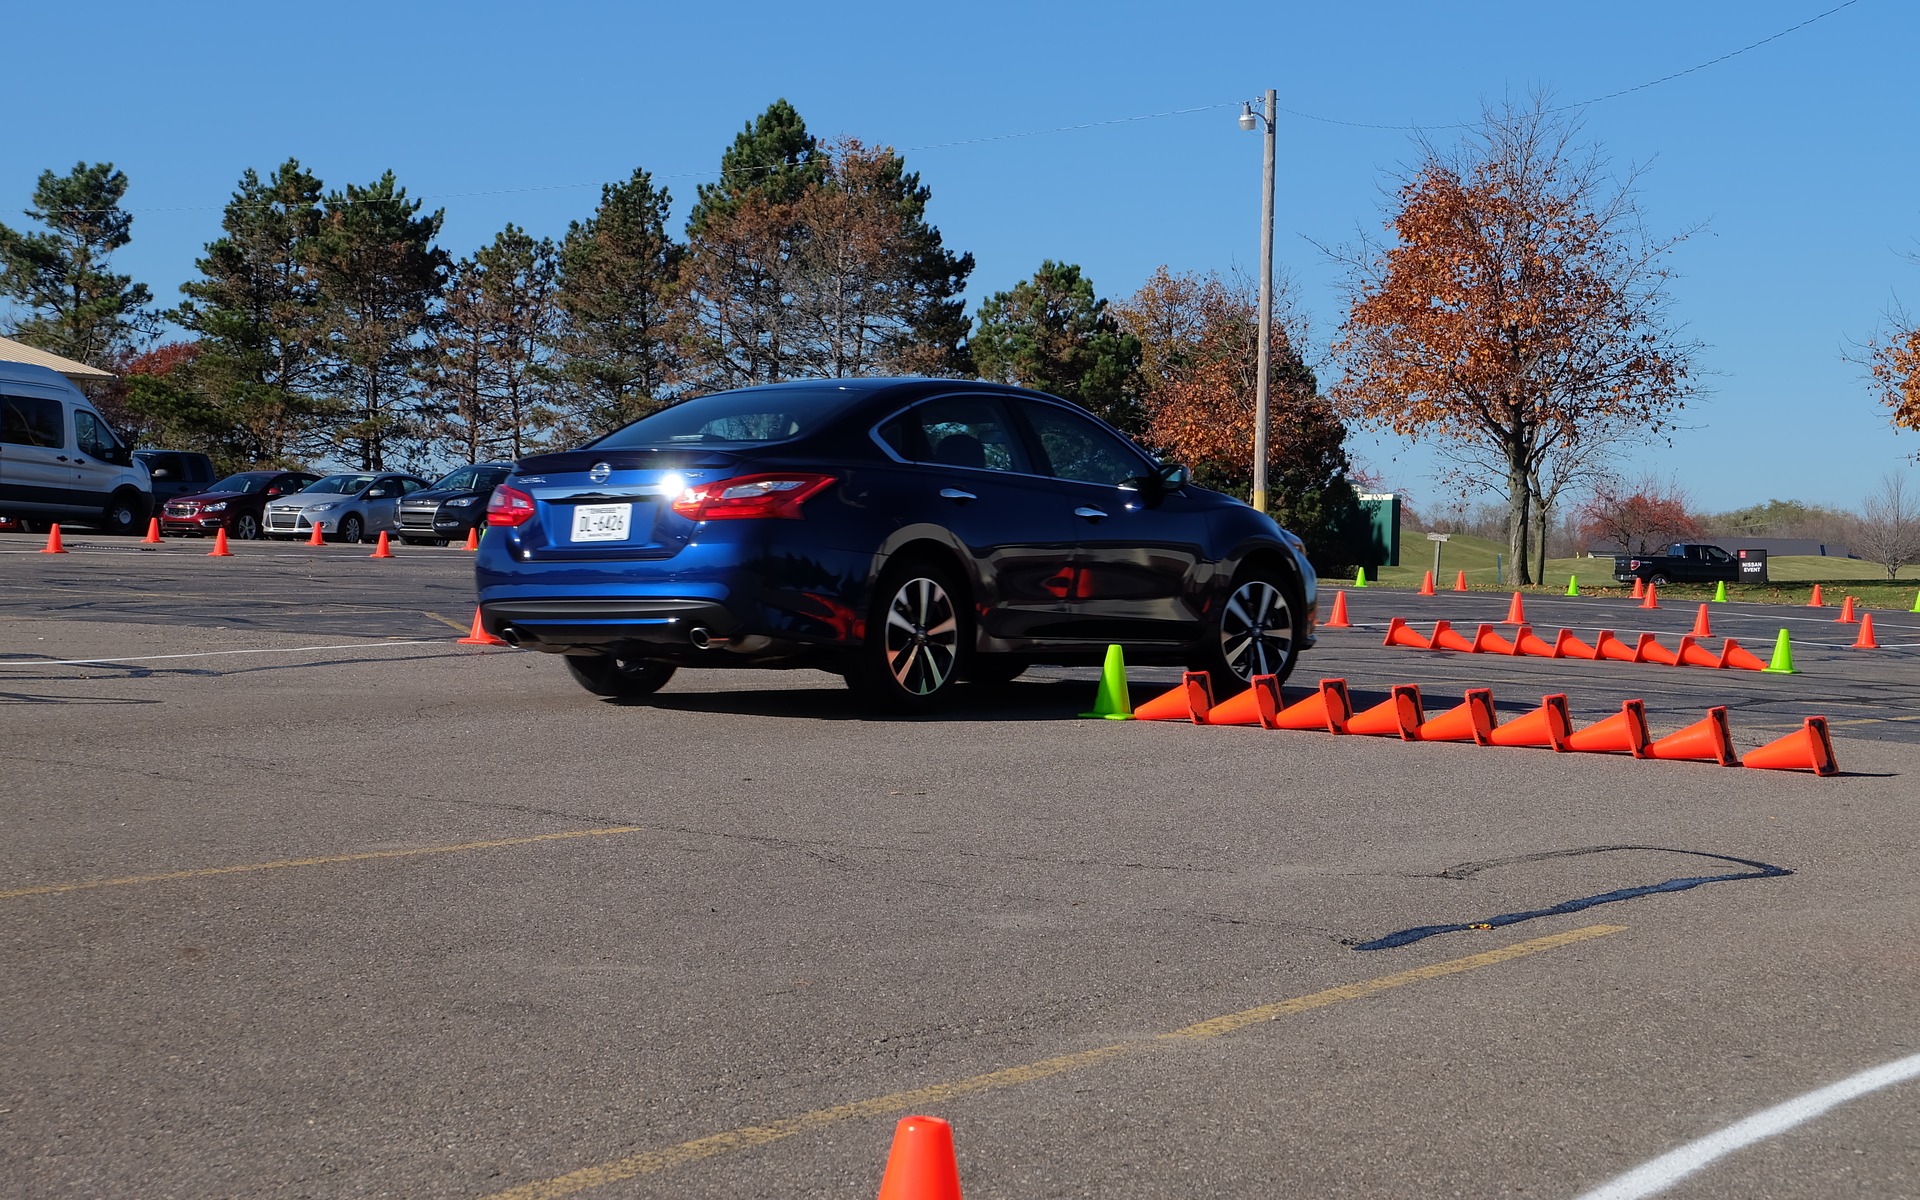 The Altima SR on a short handling course